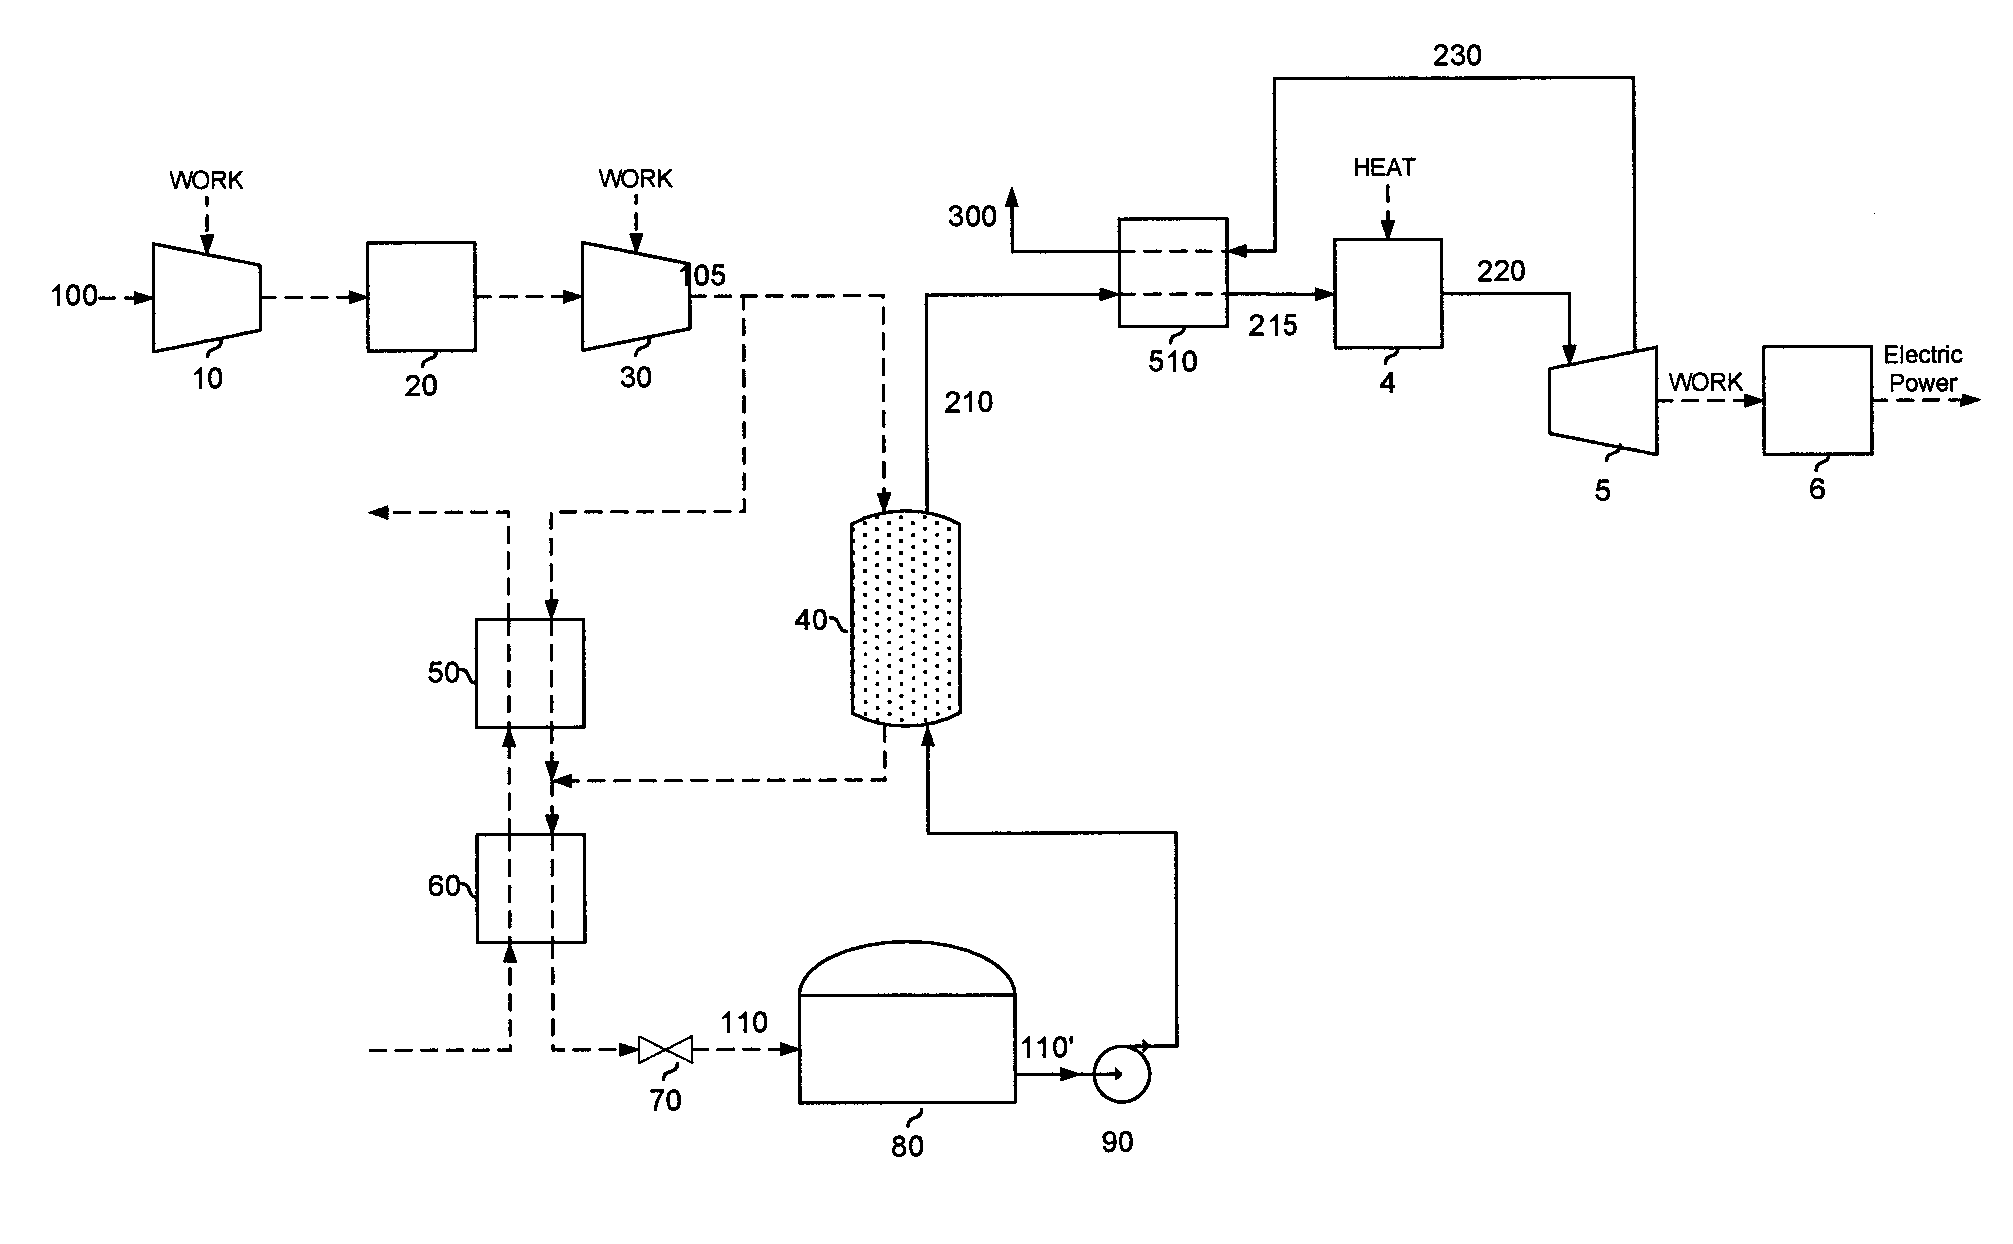 Method and System to Produce Electric Power